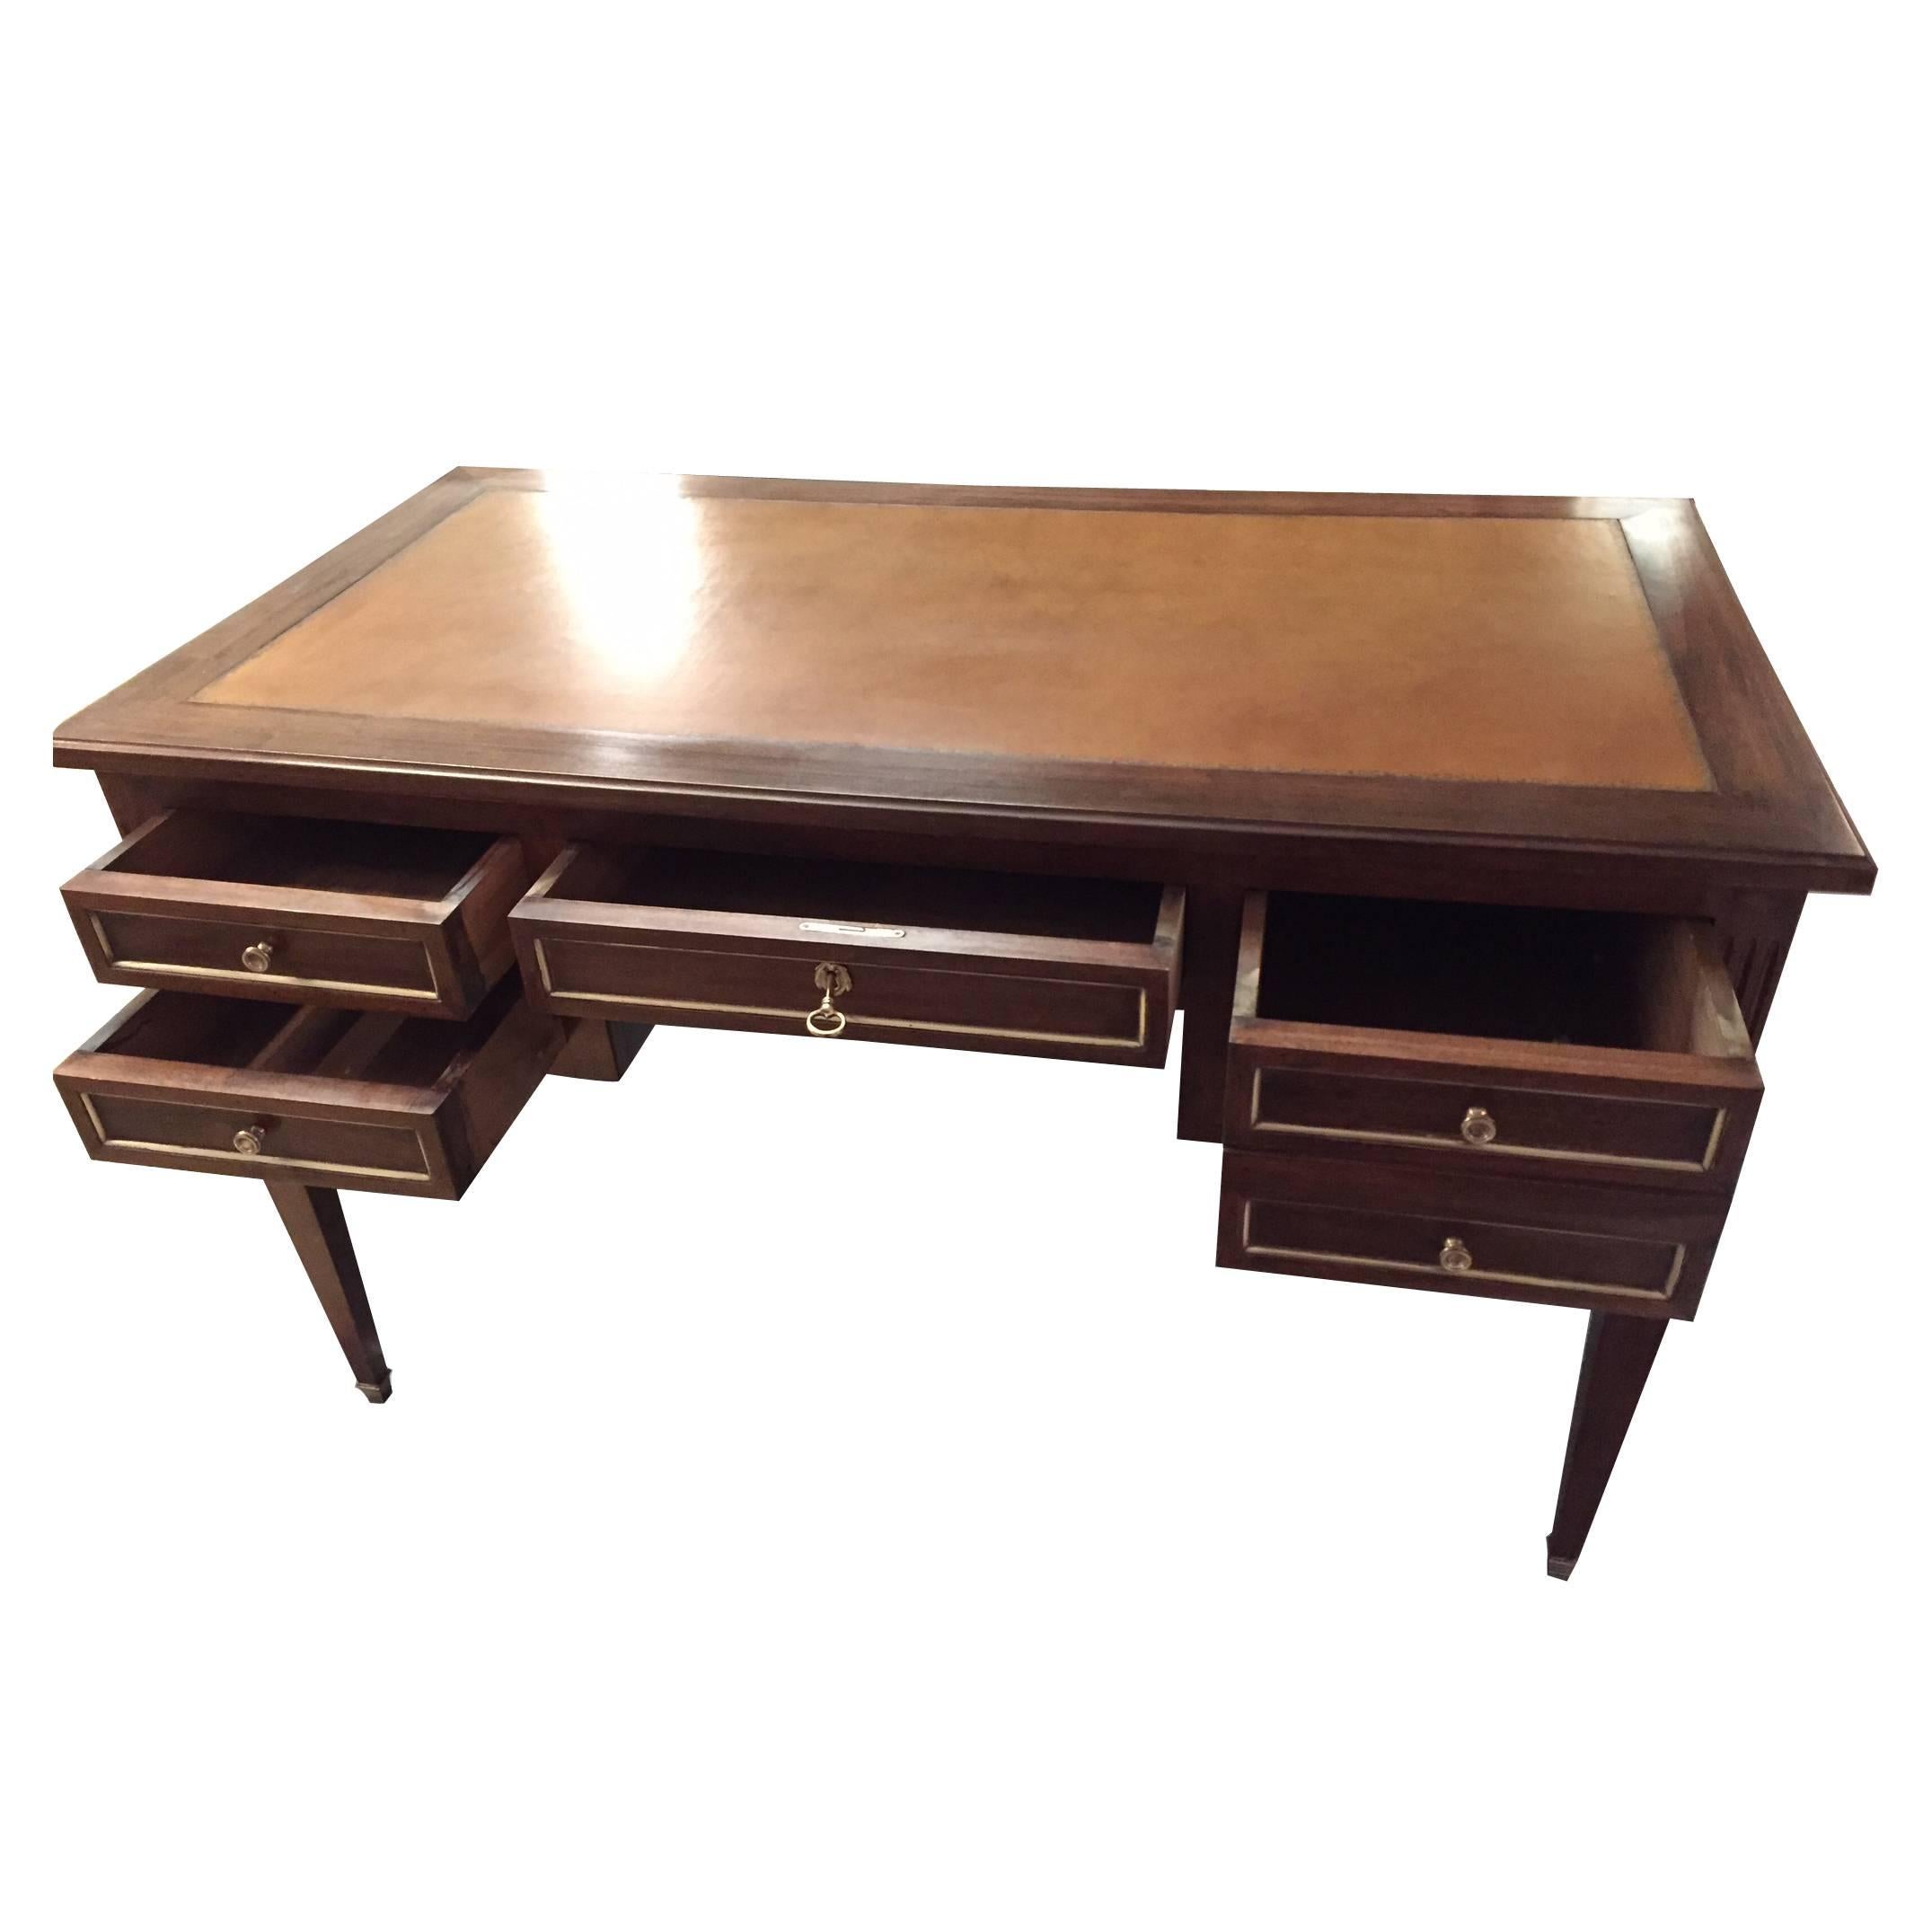 French Leather Writing Desk Table with Glass over Cognac Leather Top 4 Drawers For Sale